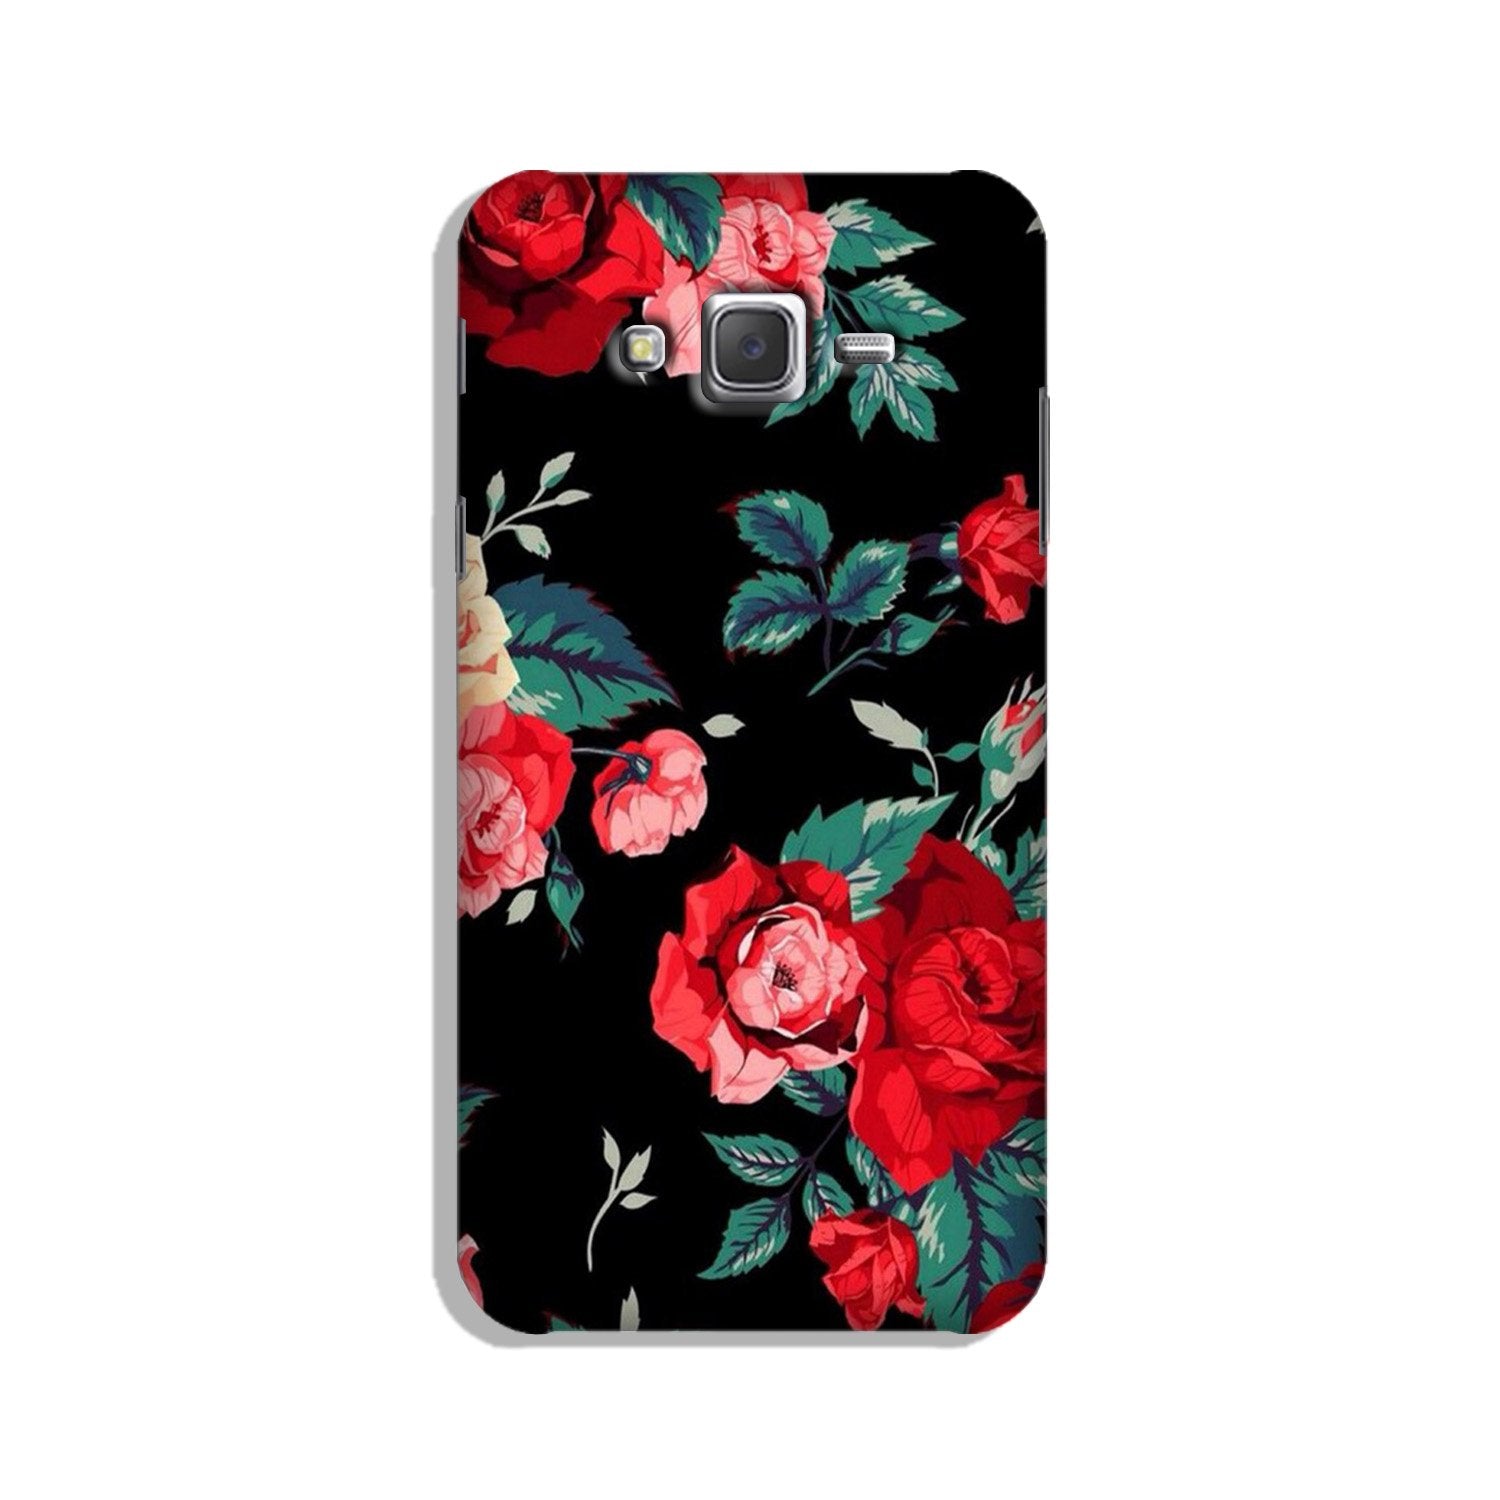 Red Rose2 Case for Galaxy J7 (2015)